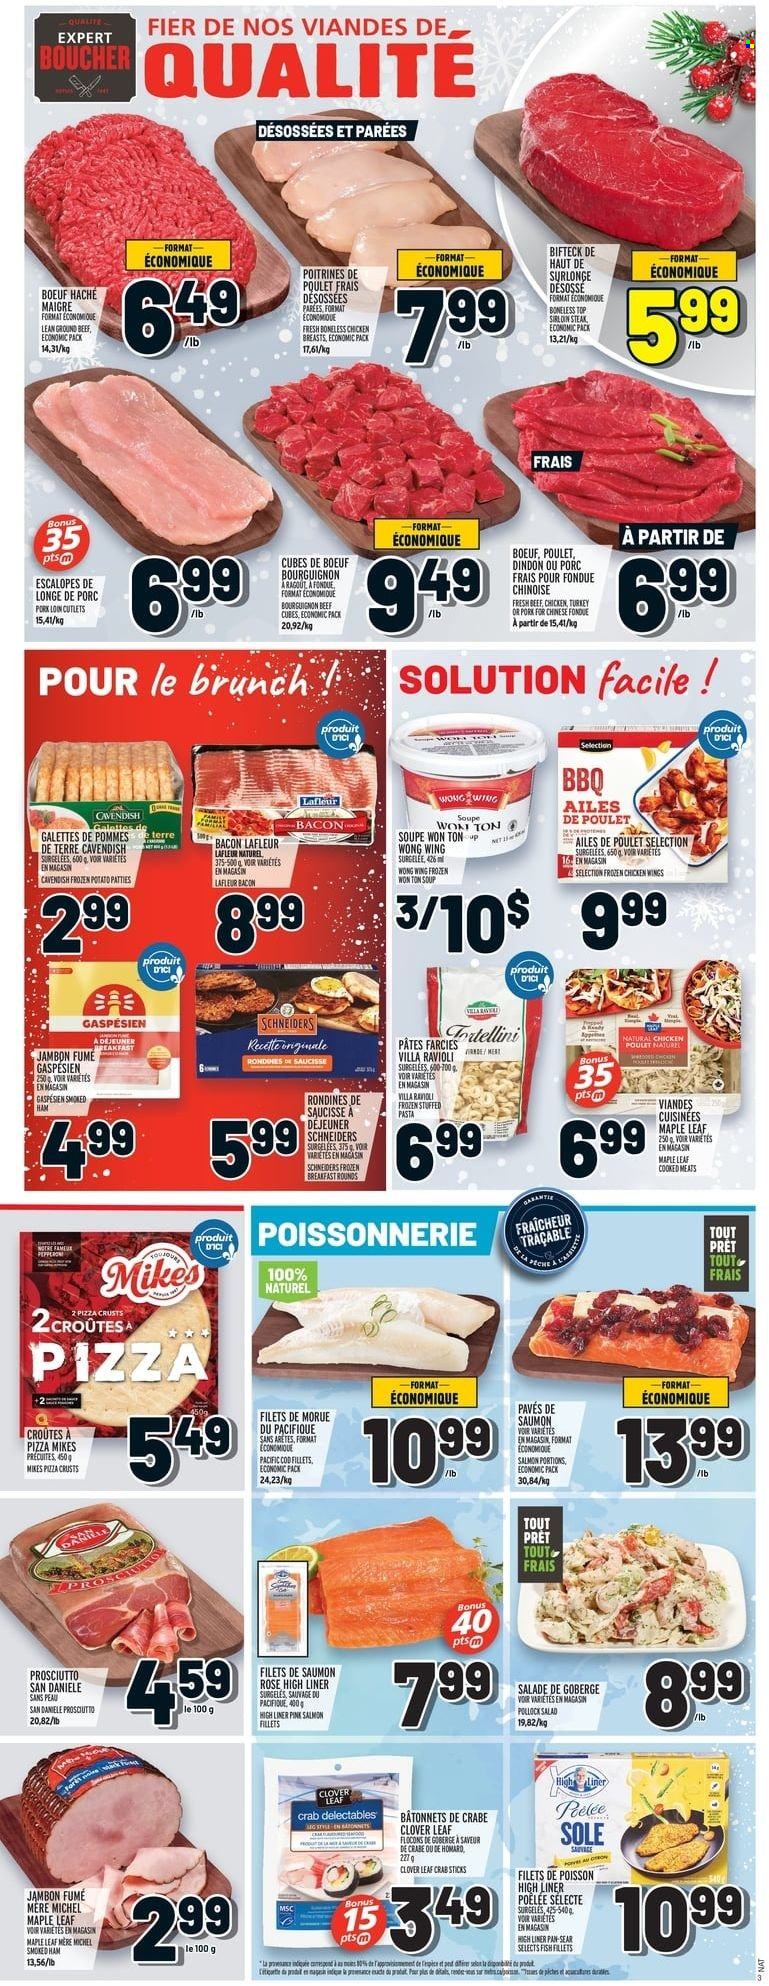 thumbnail - Metro Flyer - December 30, 2021 - January 05, 2022 - Sales products - salad, cod, fish fillets, salmon, salmon fillet, pollock, crab, fish, ravioli, pizza, soup, pasta, bacon, ham, prosciutto, smoked ham, Clover, chicken wings, rosé wine, chicken breasts, chicken, beef meat, beef sirloin, ground beef, sirloin steak, pork loin, pork meat, pan, rose, steak. Page 4.